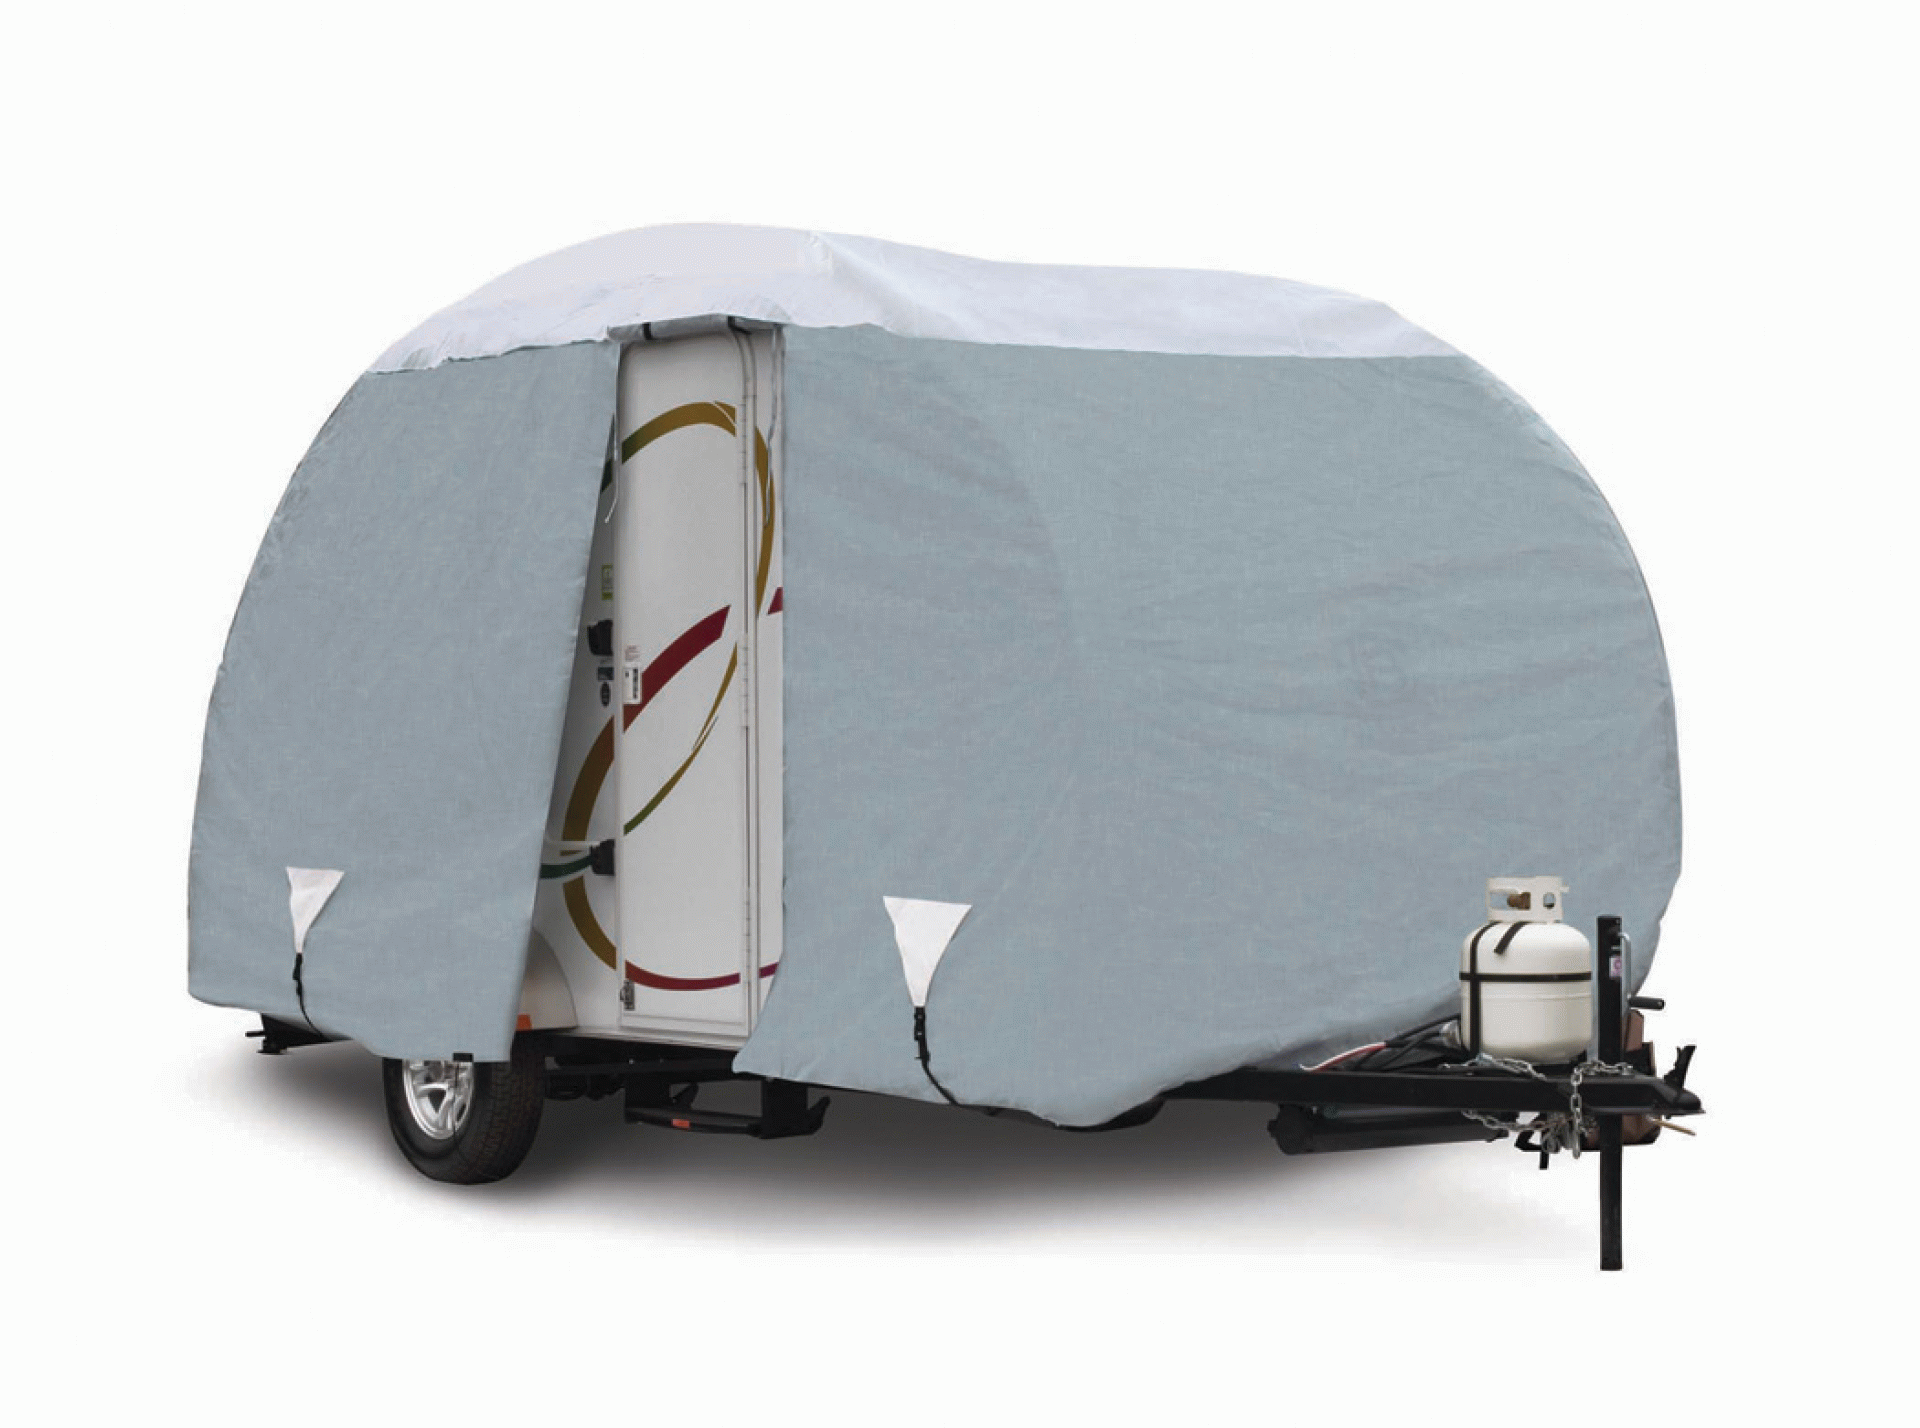 CLASSIC ACCESSORIES | 80-114-011001-00 | Cover Fits R-Pod 150 series up to 13' 1"